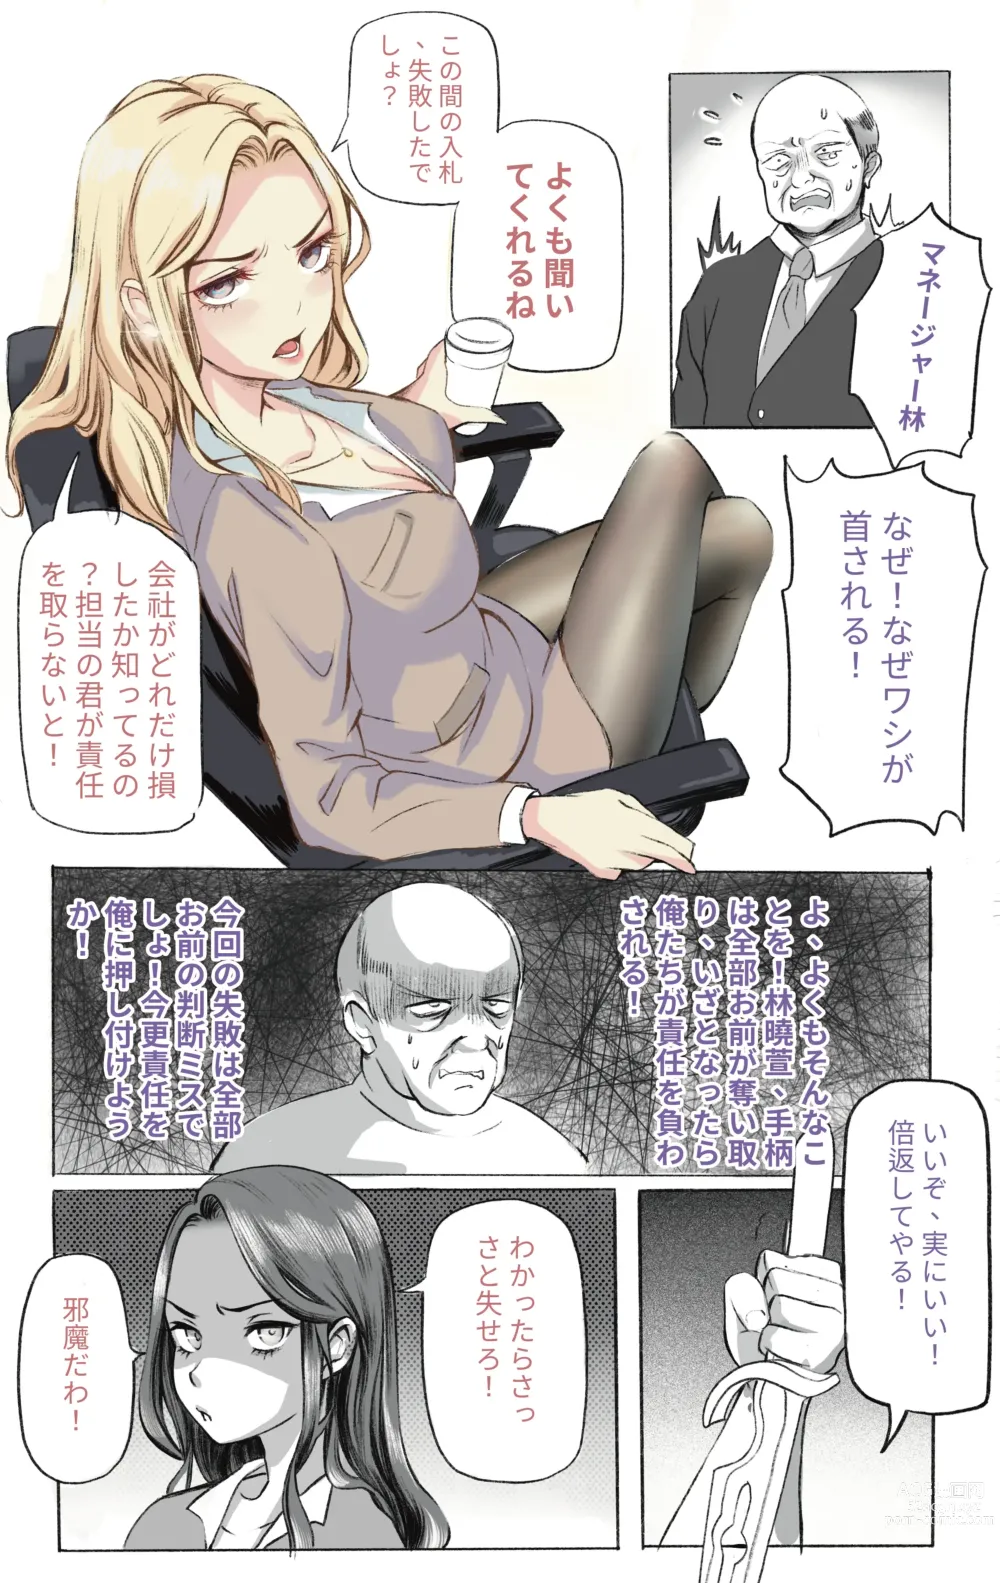 Page 8 of doujinshi 主管的秘密